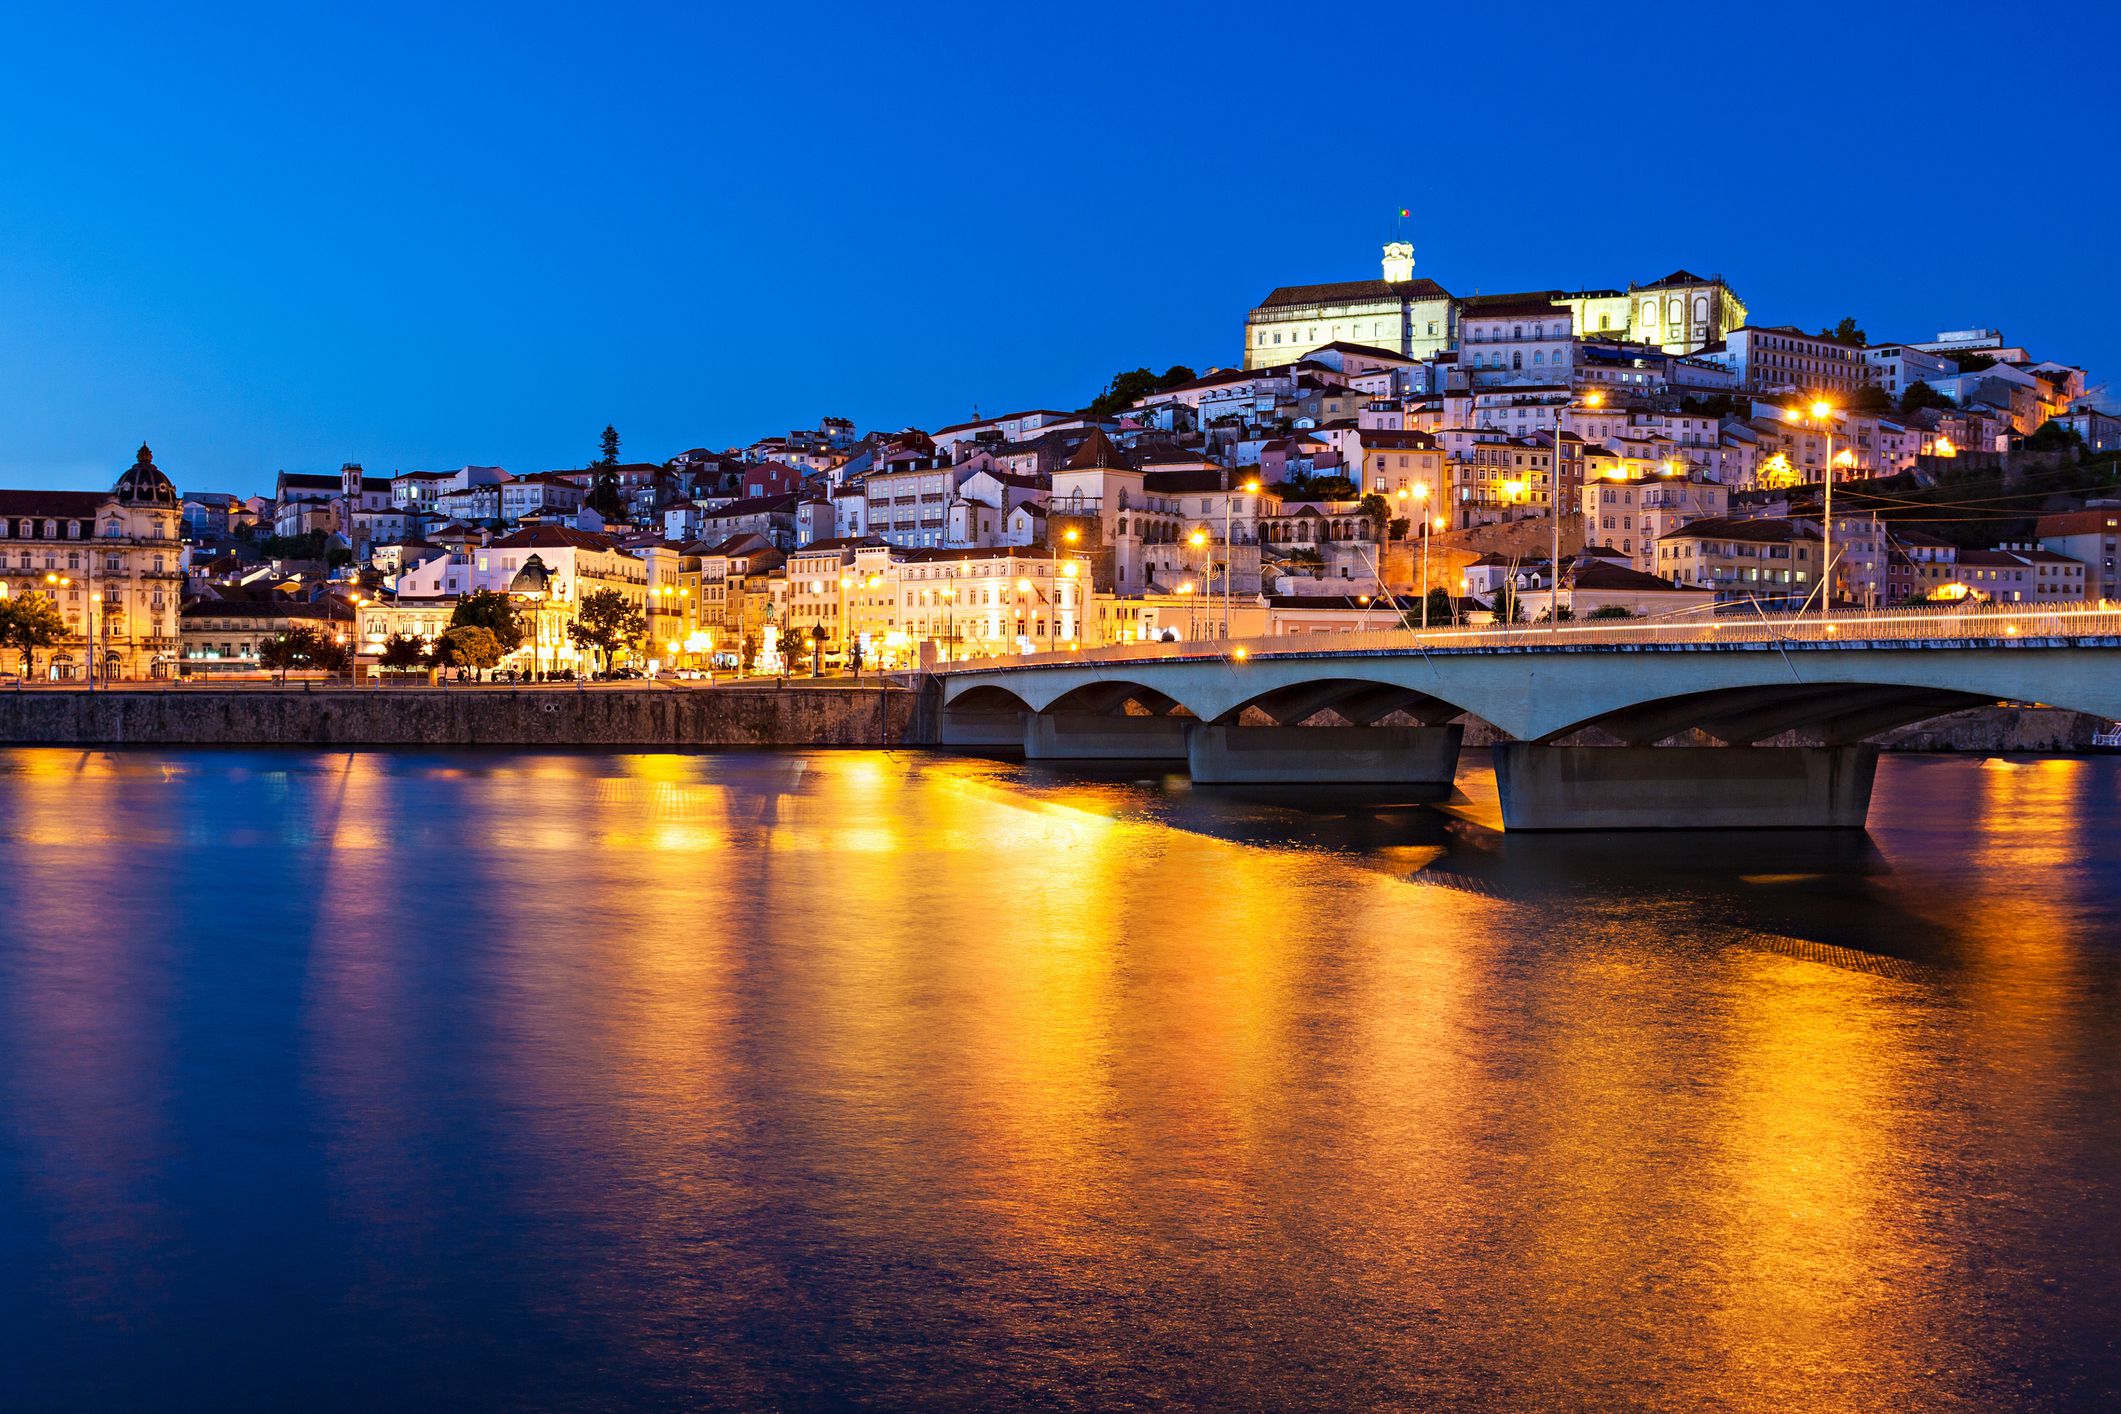 <p>Coimbra boasts the oldest university in the country, University of Coimbra, which was founded in 1290. However, this city is far from stuck in the past. The city’s riverfront is full of modern amenities and attractions, including the luxury Hastens Sleep Spa and the Center for Contemporary Art at Coimbra. </p>